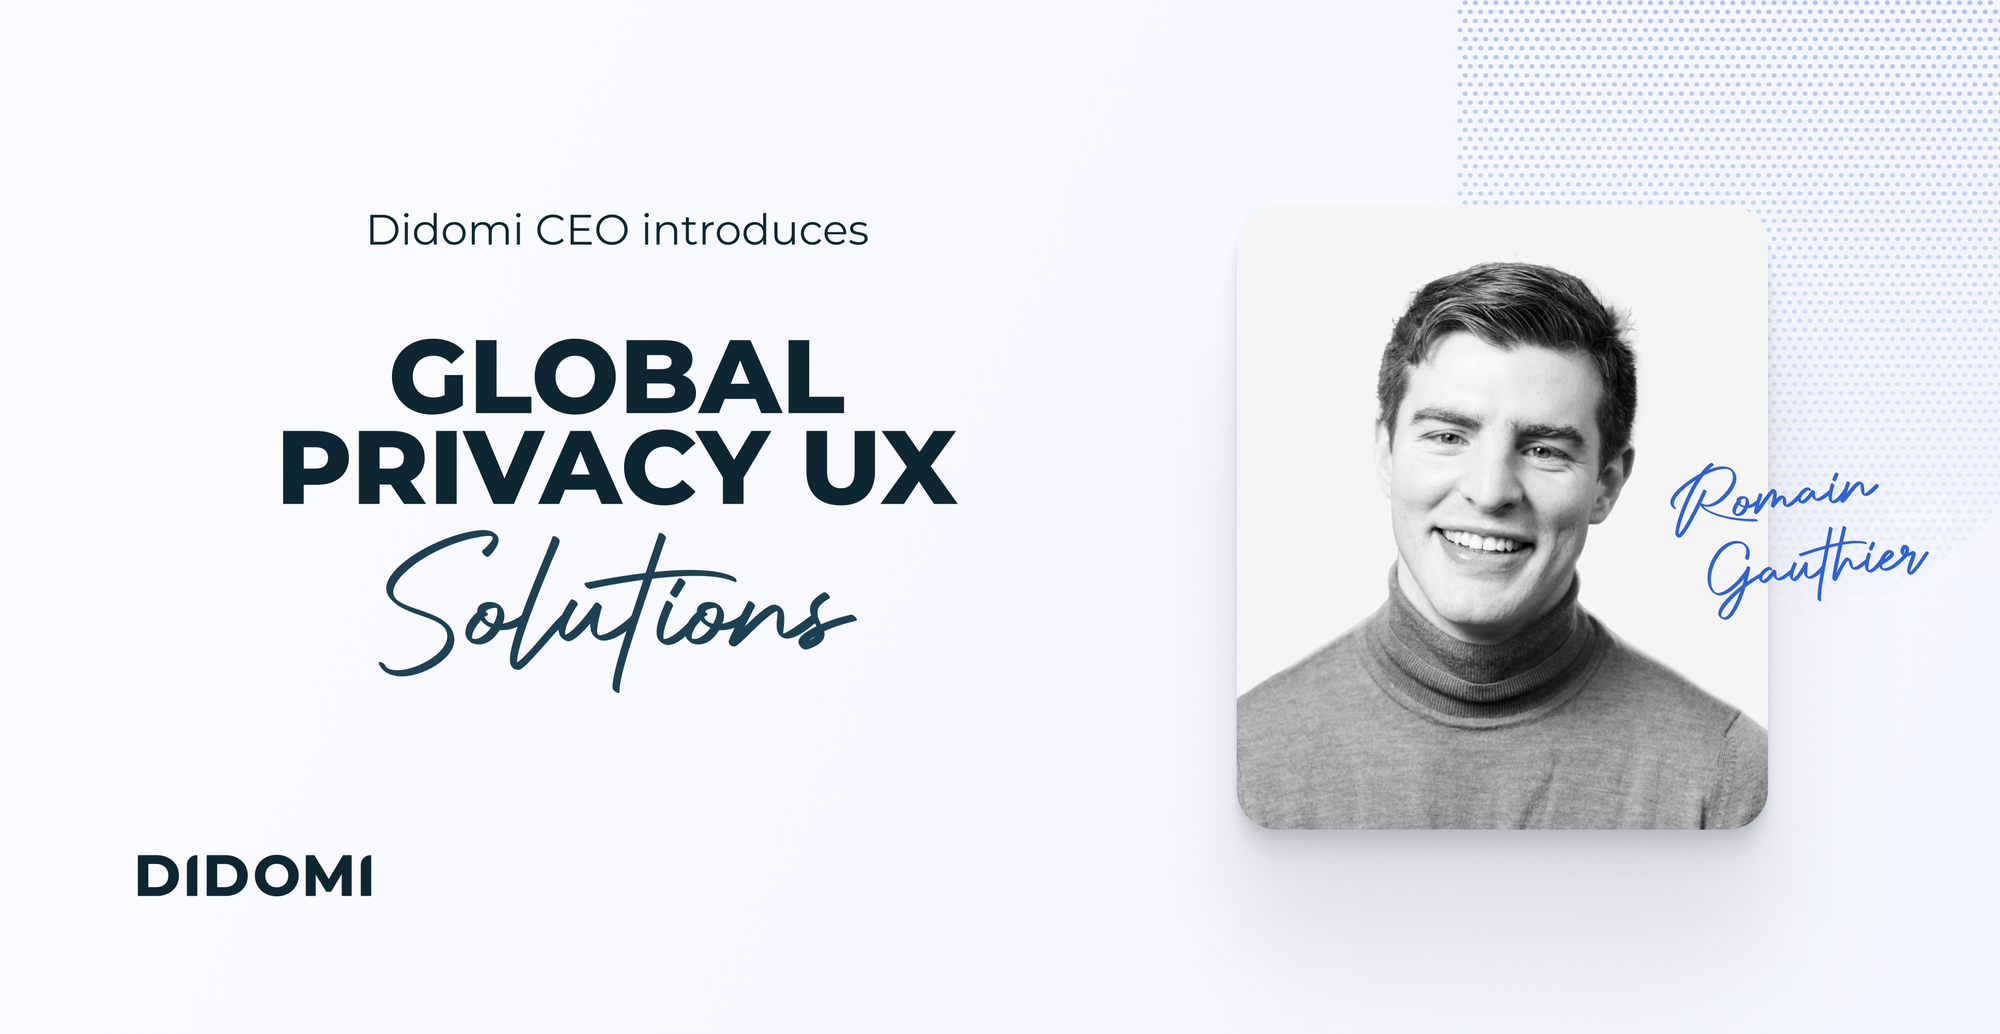 Didomi CEO introduces Global Privacy UX Solutions